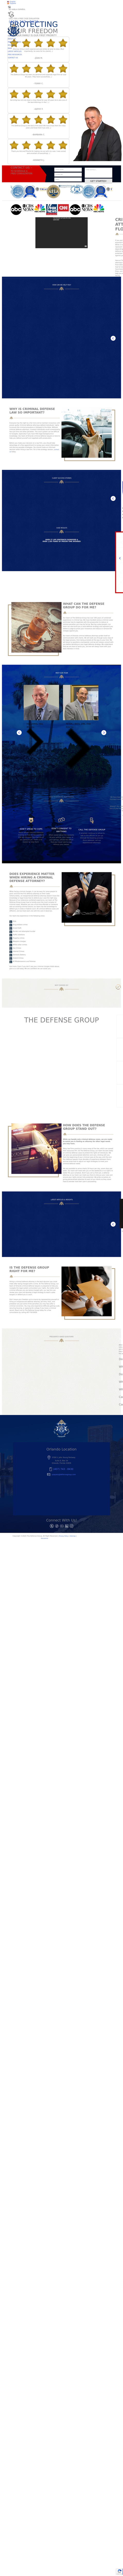 The Defense Group - Kissimmee FL Lawyers